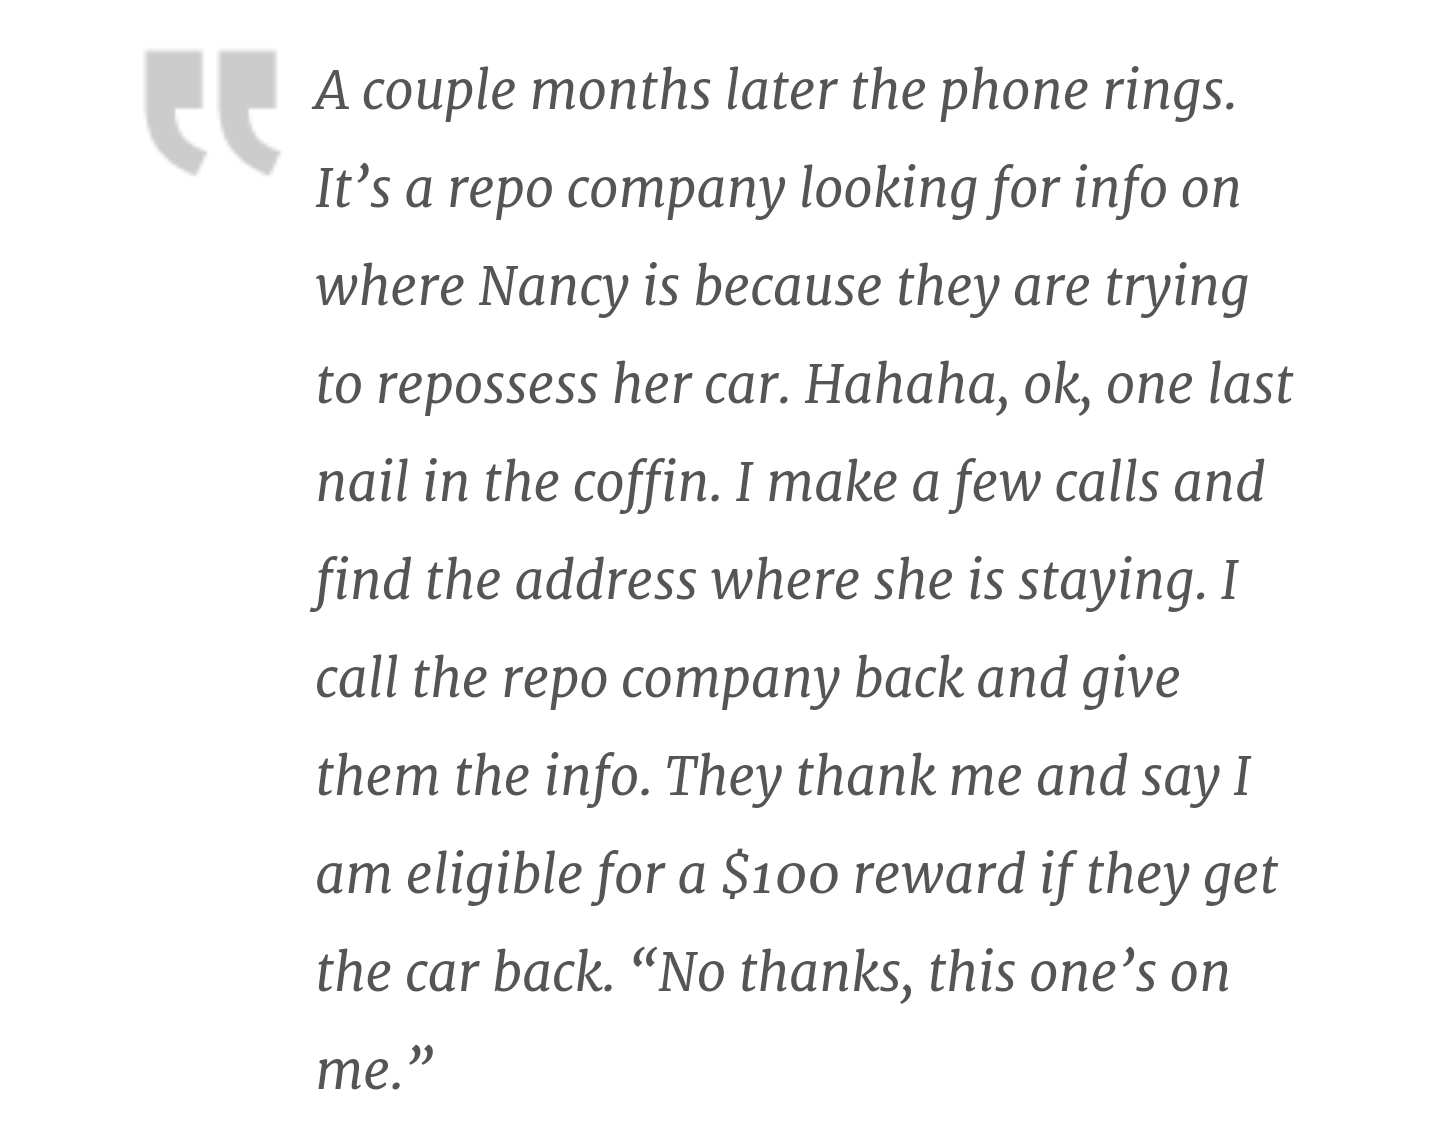 document - A couple months later the phone rings. It's a repo company looking for info on where Nancy is because they are trying to repossess her car. Hahaha, ok, one last nail in the coffin. I make a few calls and find the address where she is staying. I